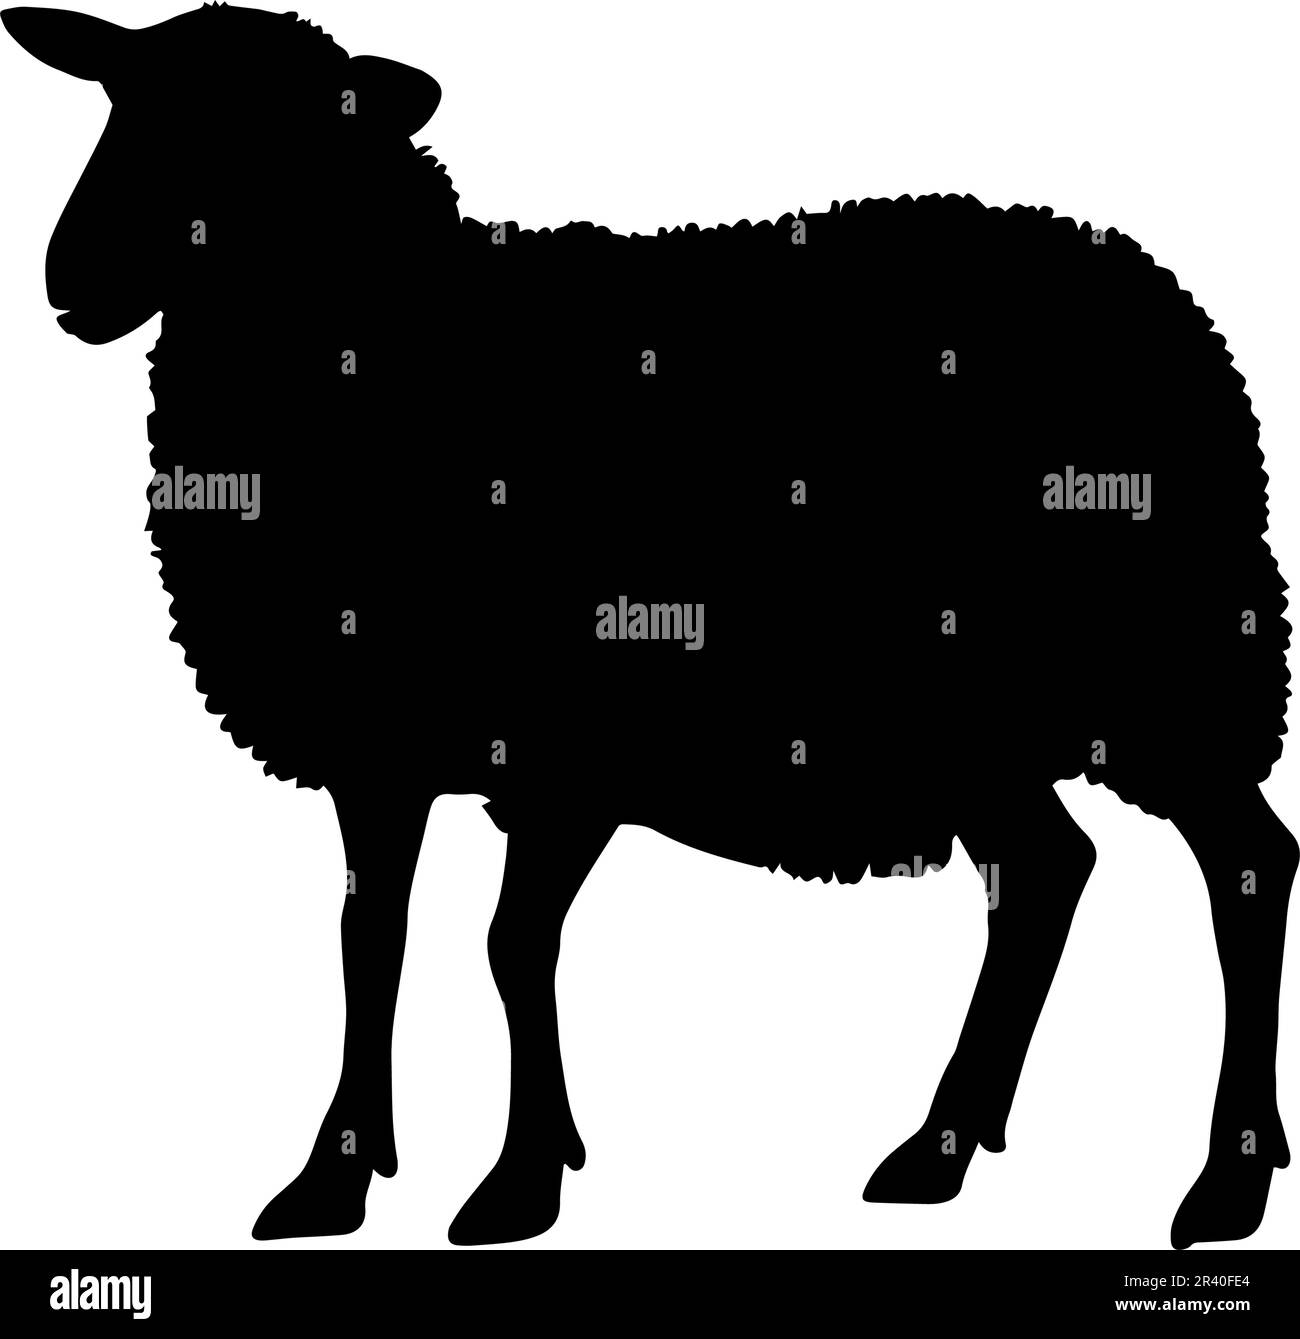 Sheep silhouette isolated on white background. Vector illustration Stock Vector